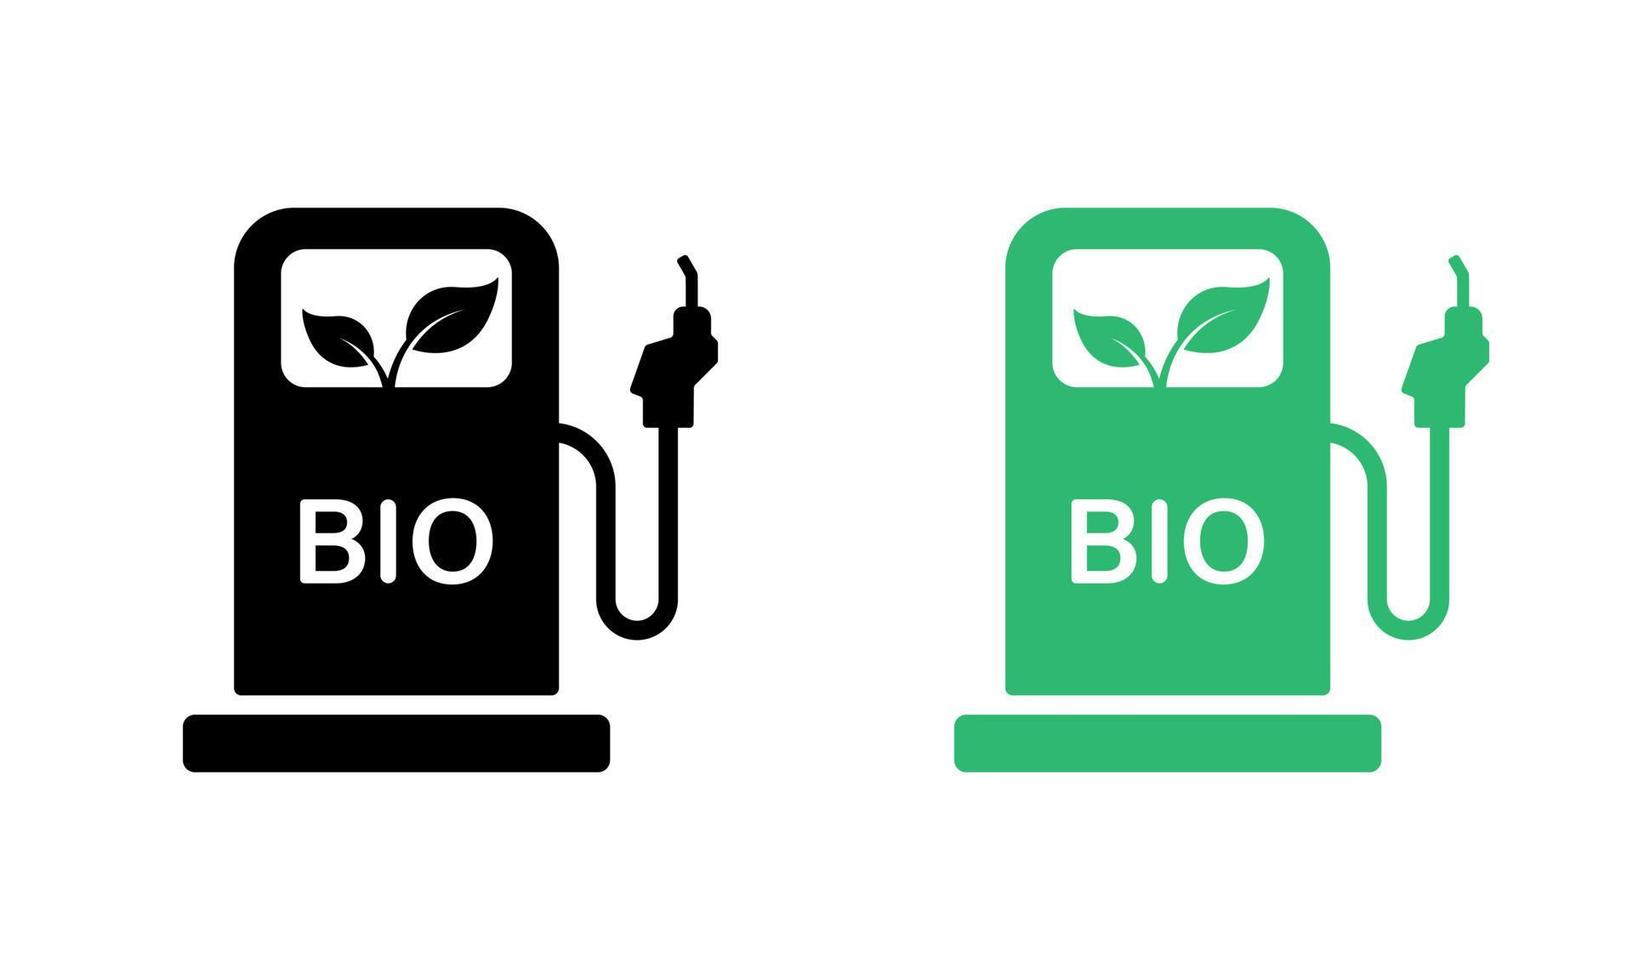 Bio Silhouette Icon Set. Environmental Natural Biofuel Alternative Gas. Ecology Diesel Oil Station Glyph Pictogram. Organic Green Energy in Gasoline Pump Icon. Isolated Vector Illustration.